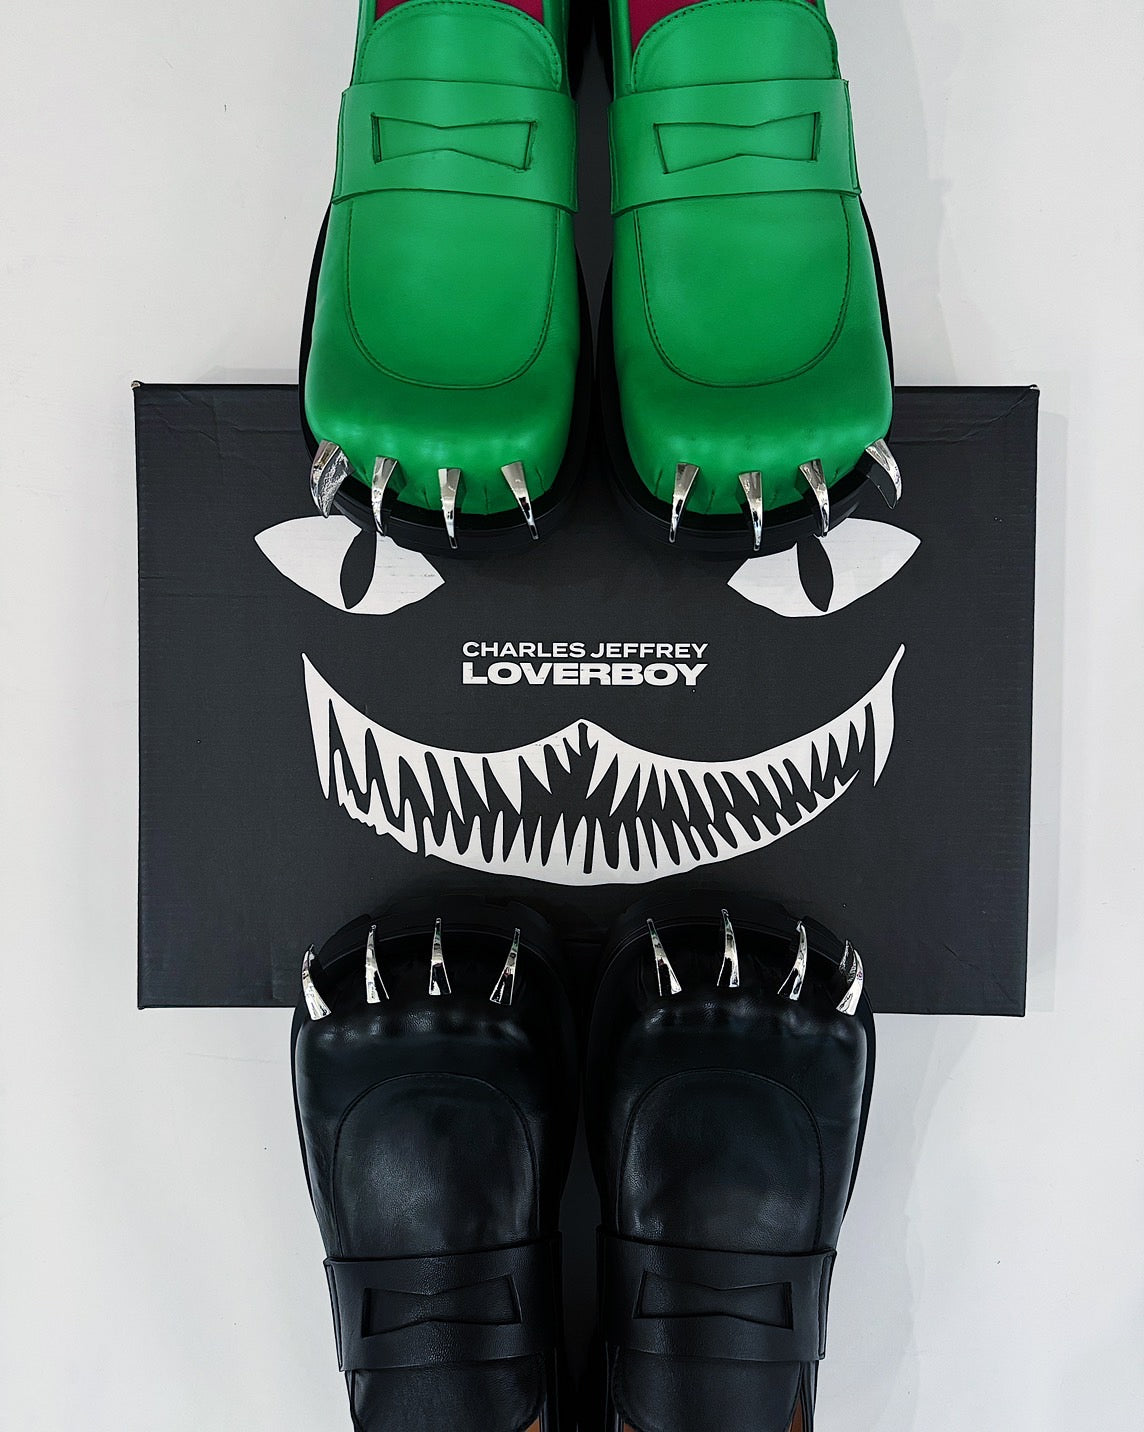 【CHARLES JEFFREY LOVERBOY】<br> The much anticipated "MOCCASIN MOGGIES" are now in stock!